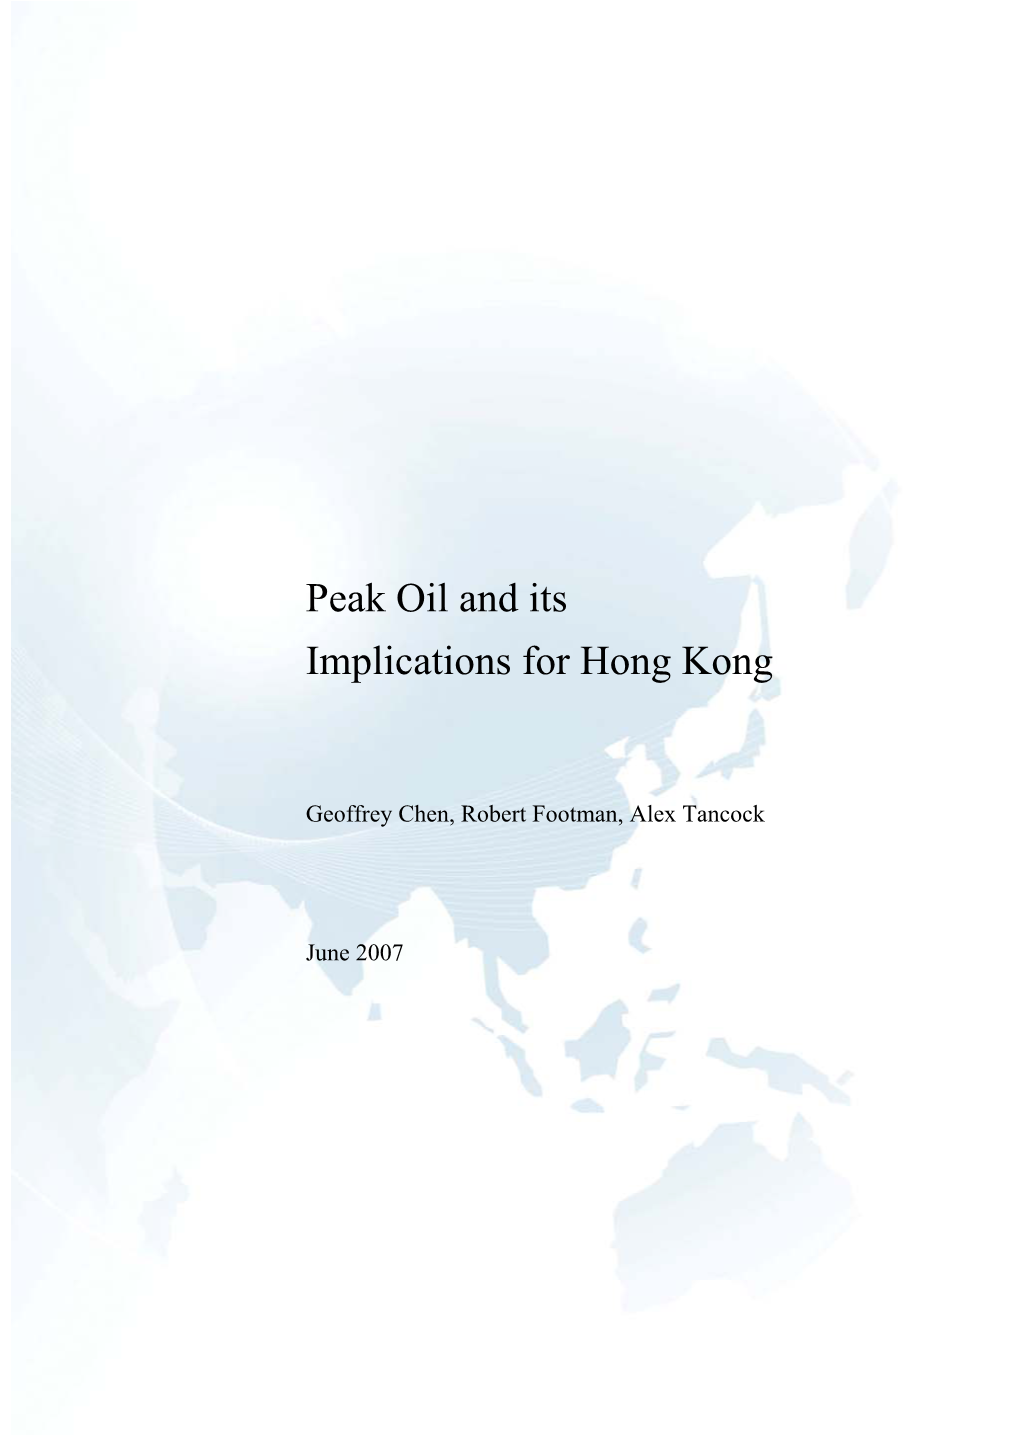 Peak Oil and Its Implications for Hong Kong